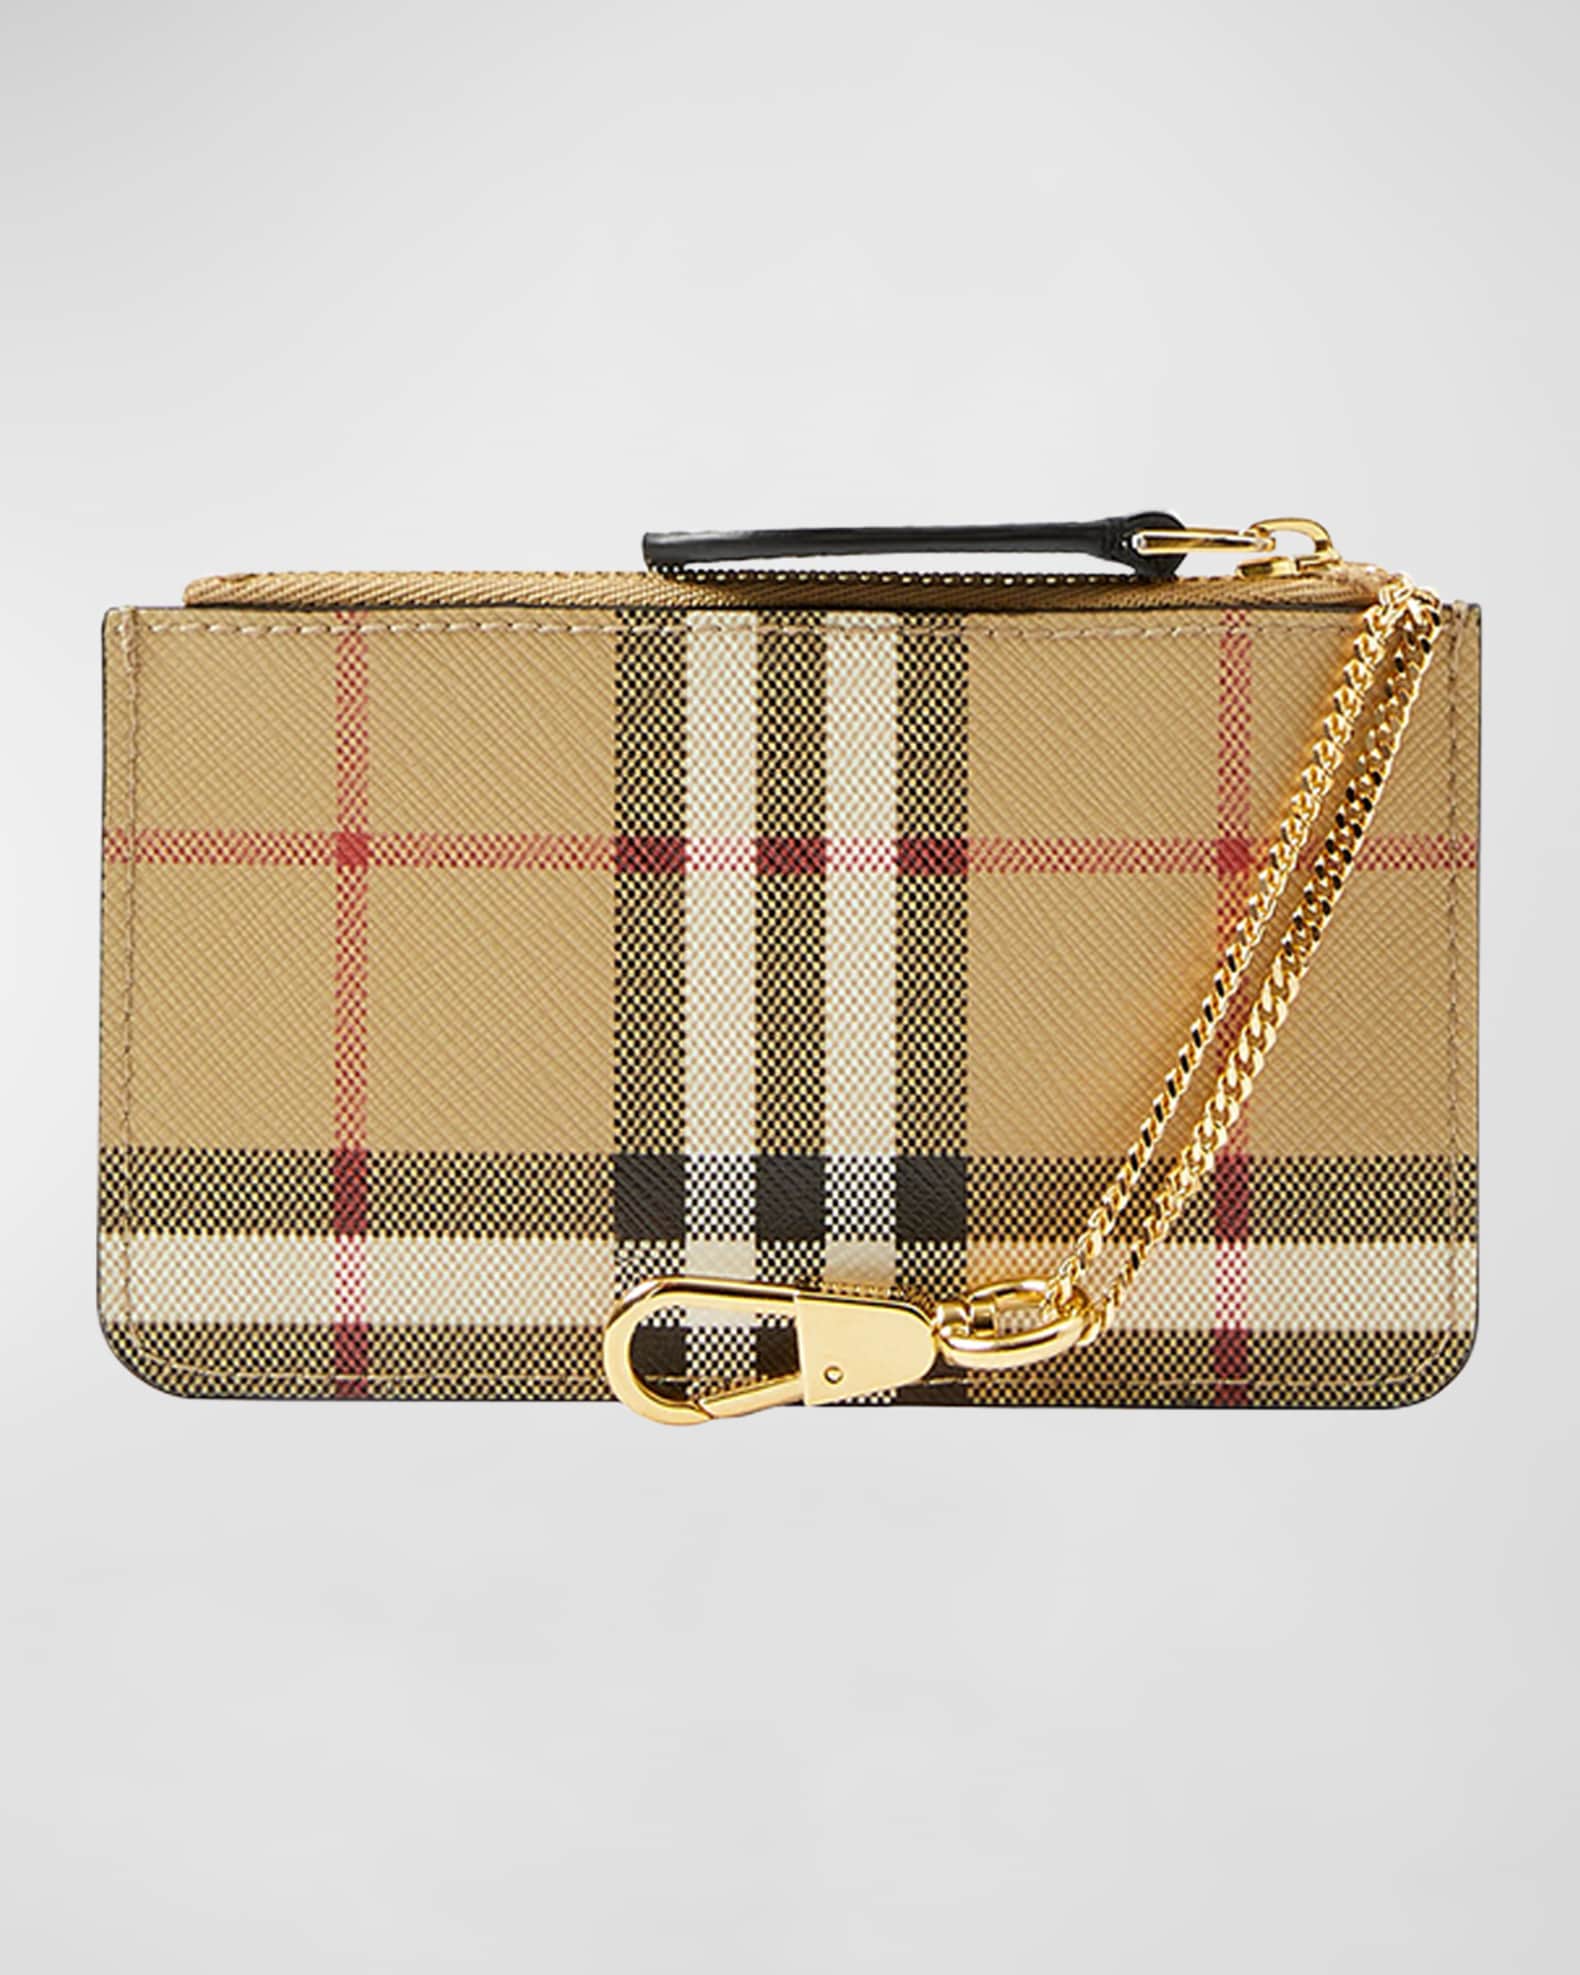 Burberry Leather zipped envelope with tartan pattern